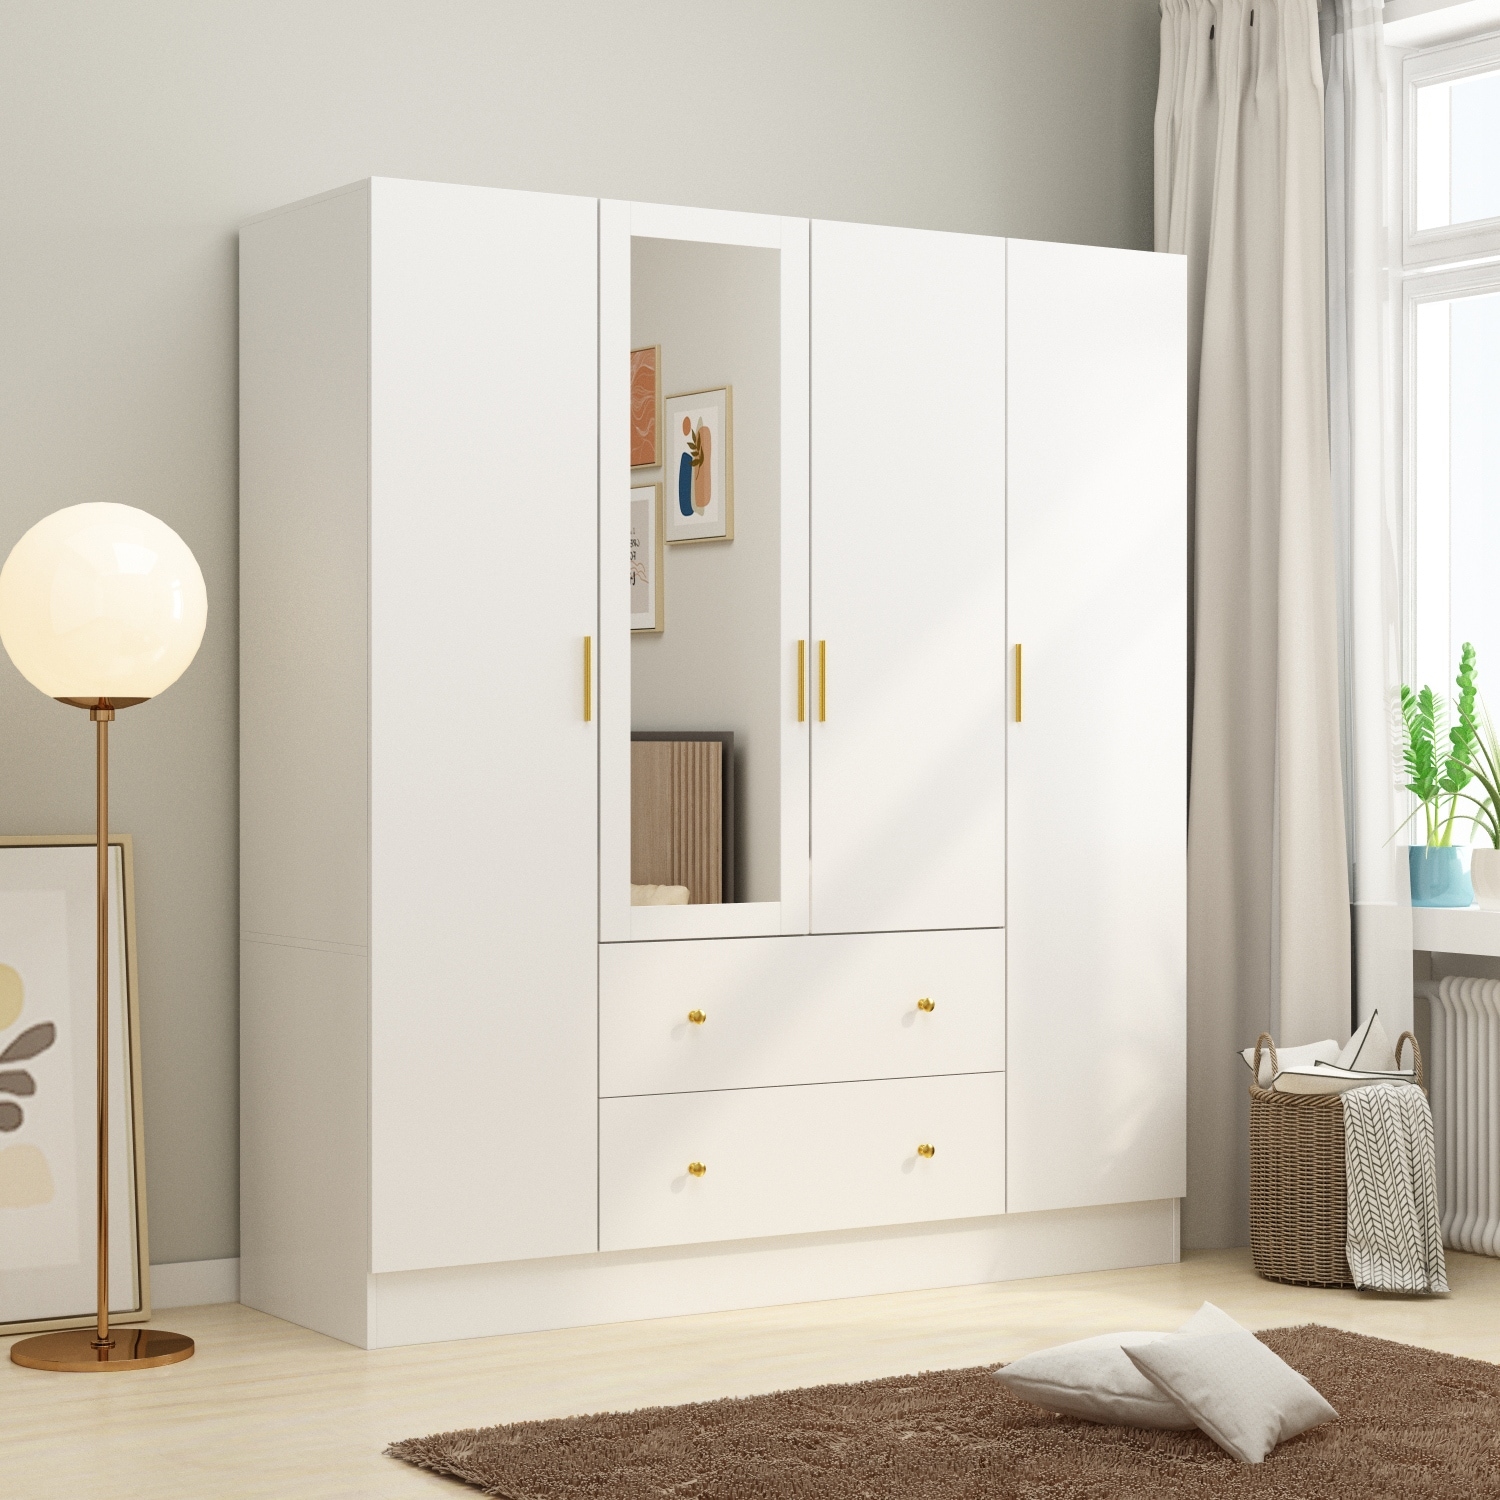 https://ak1.ostkcdn.com/images/products/is/images/direct/374b9b184017219540f21749ecefe61cd3a15d70/4-Door-Wardrobe-Large-Storage-Cabinet-Armoire-with-Mirror-and-2-Drawer.jpg